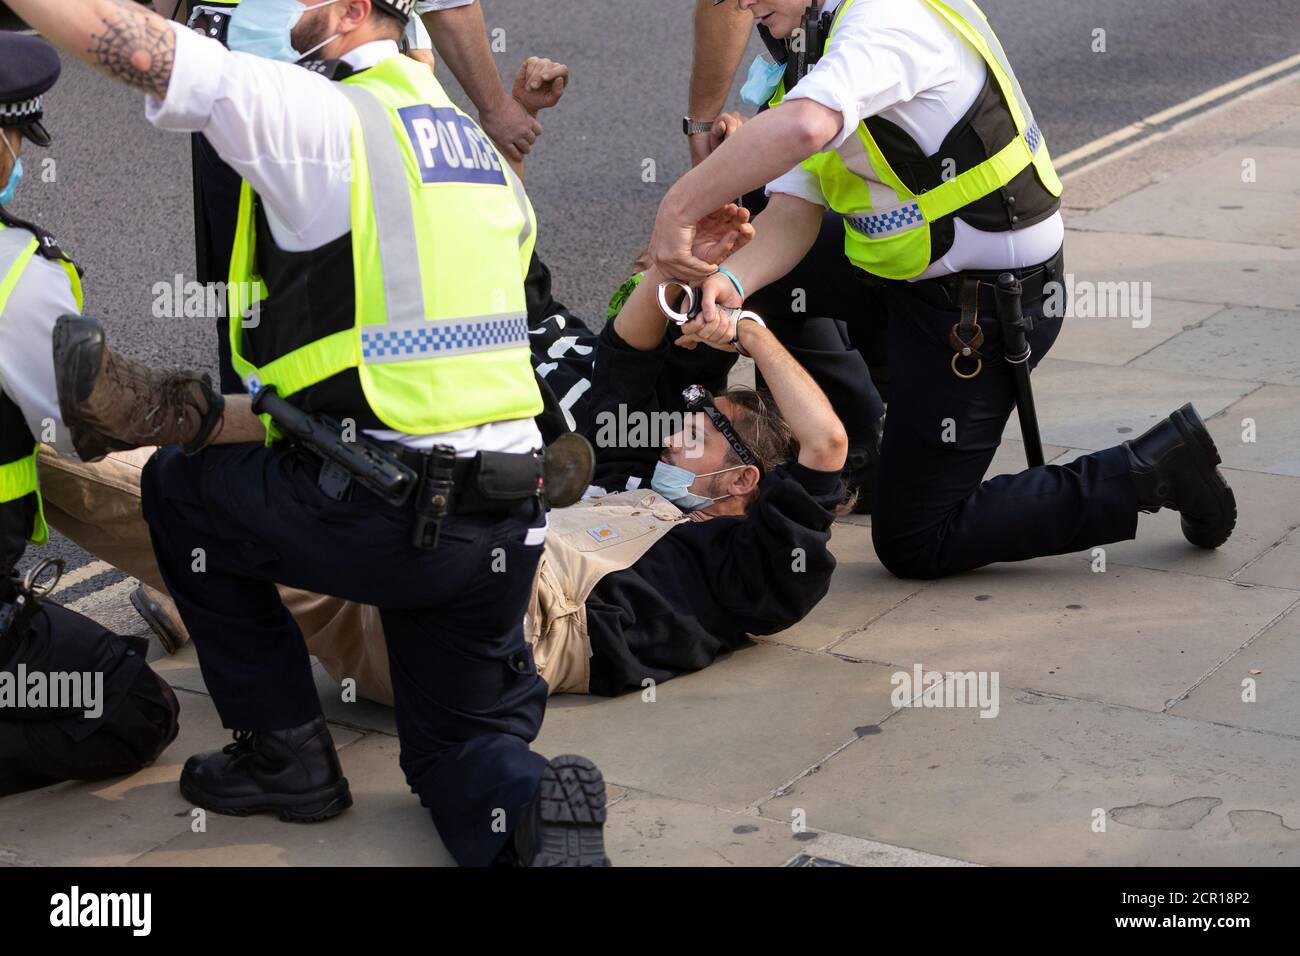 Arrested protester handcuffed on ground outside Parliament, Extinction Rebellion demonstration, London, 10 September 2020 Stock Photo